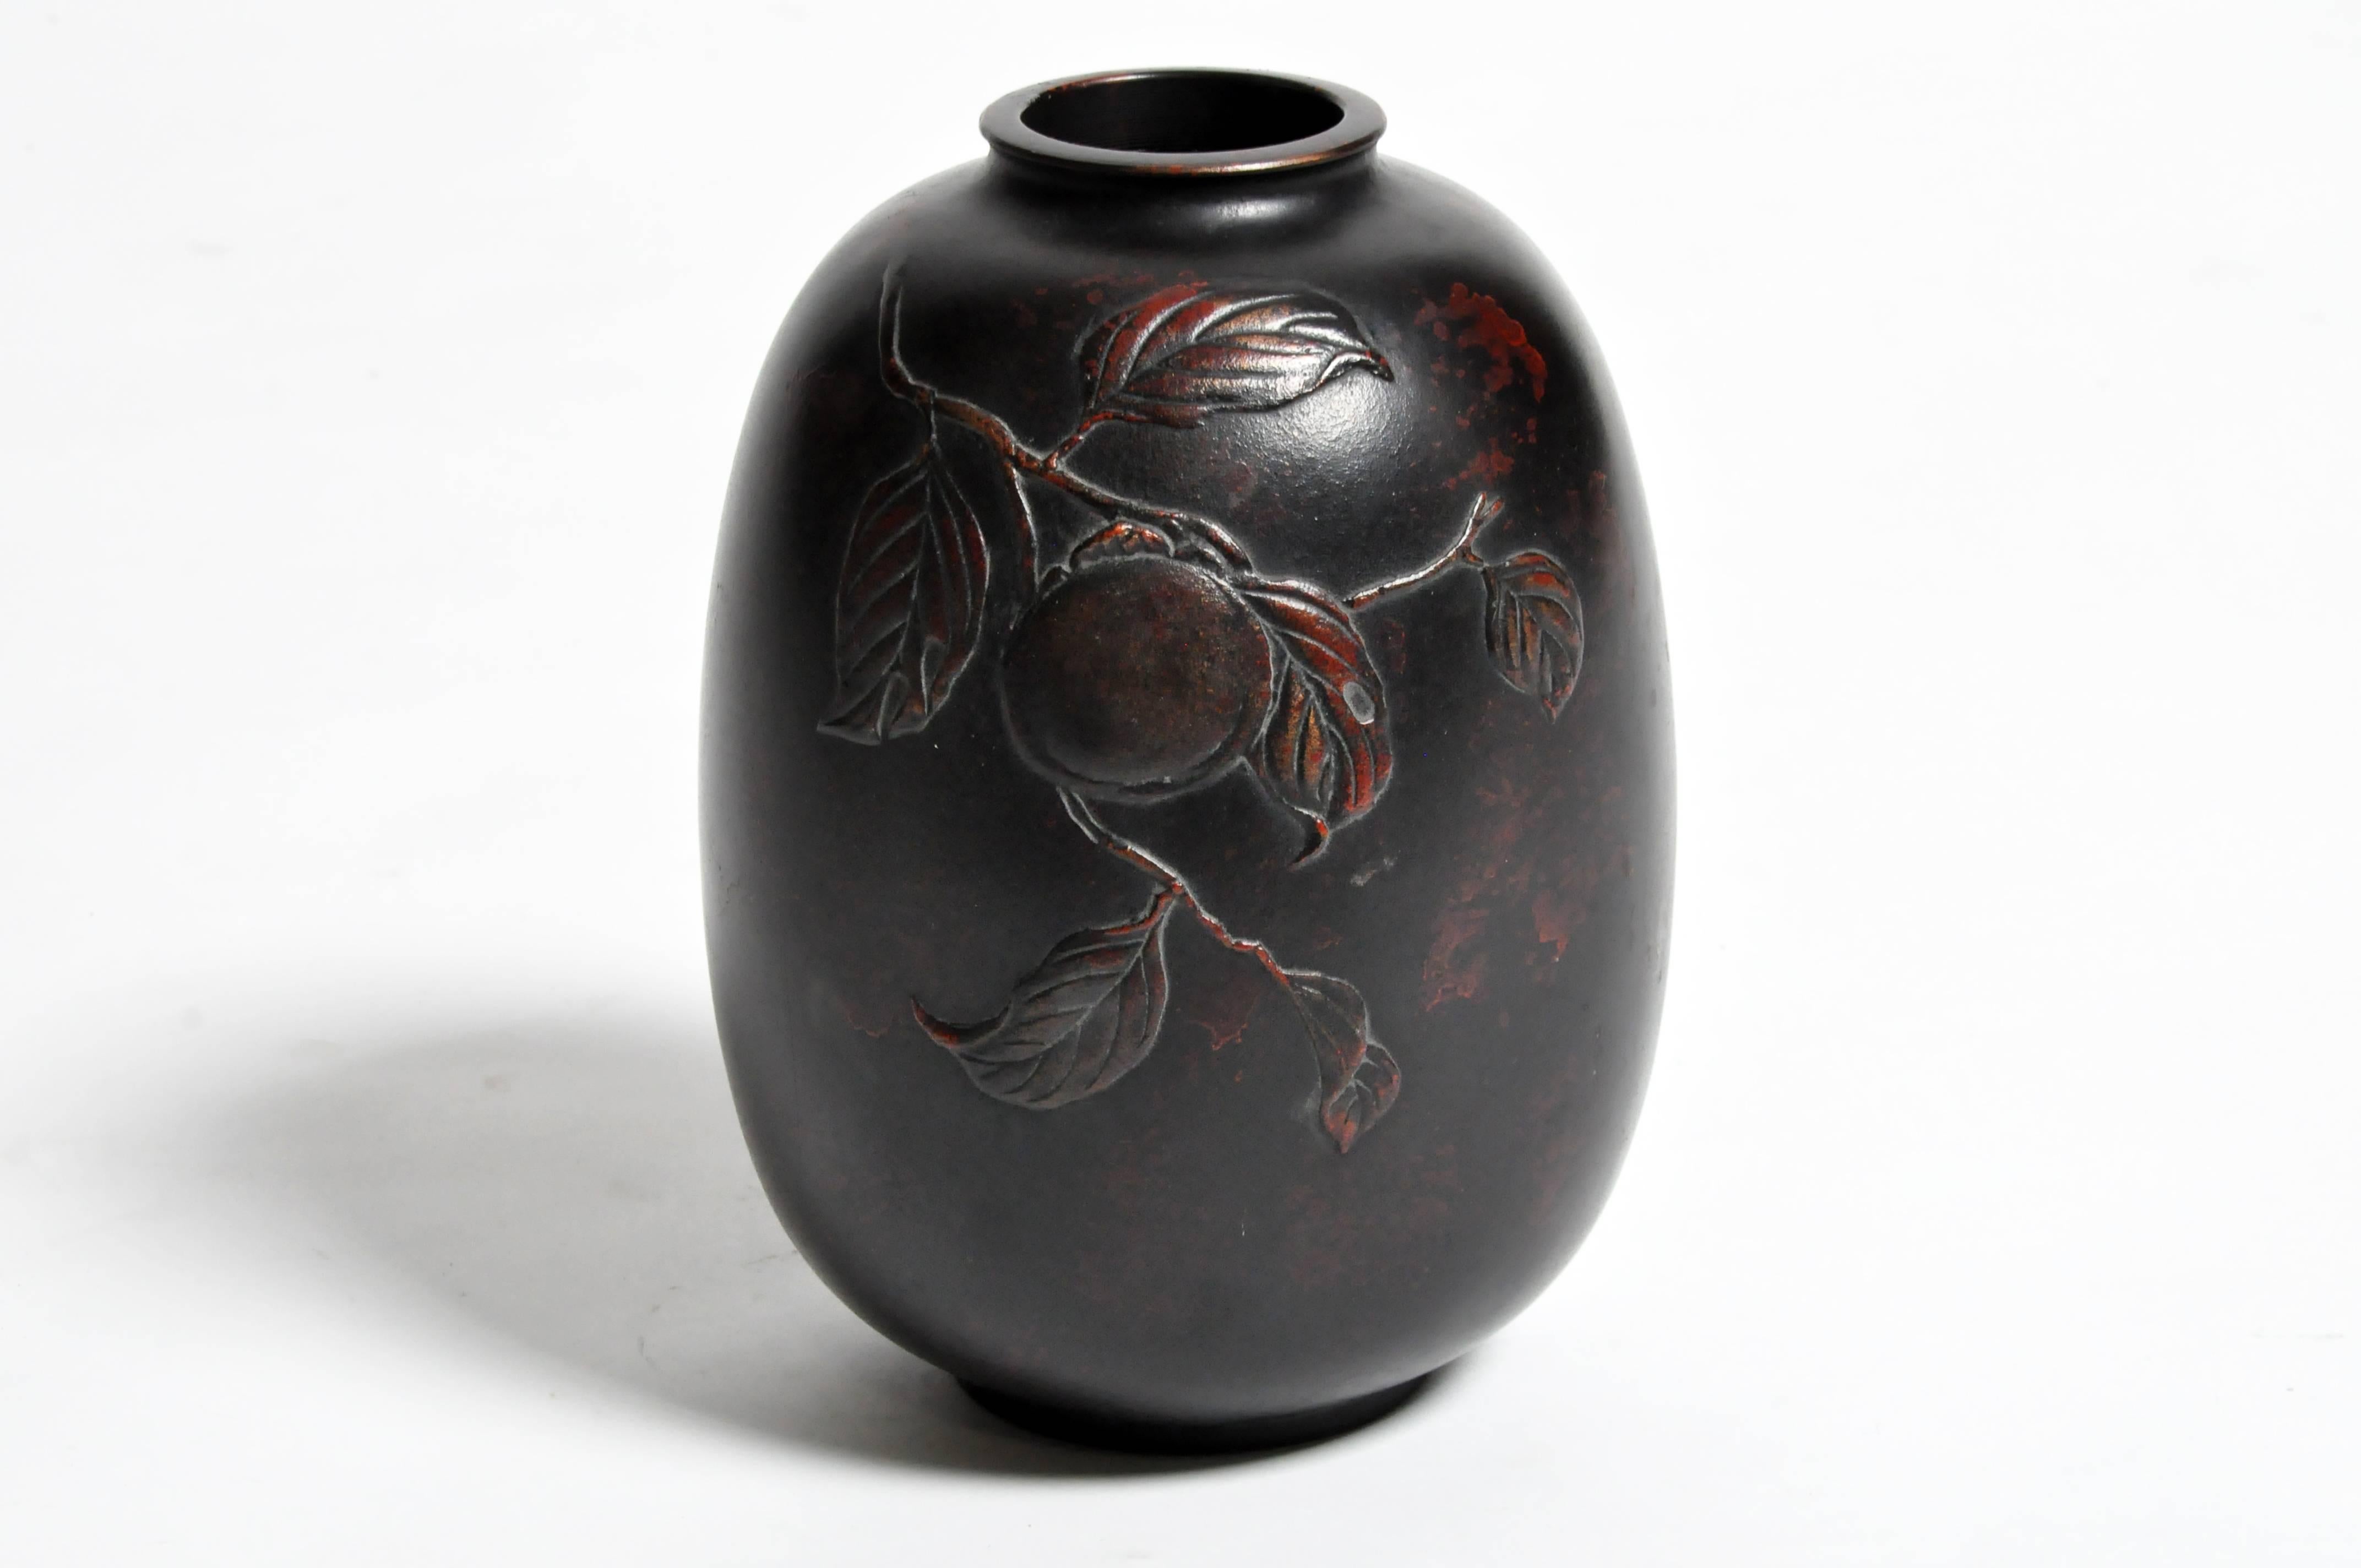 This elegant Japanese ceramic vessel from early 20th century, Japan.